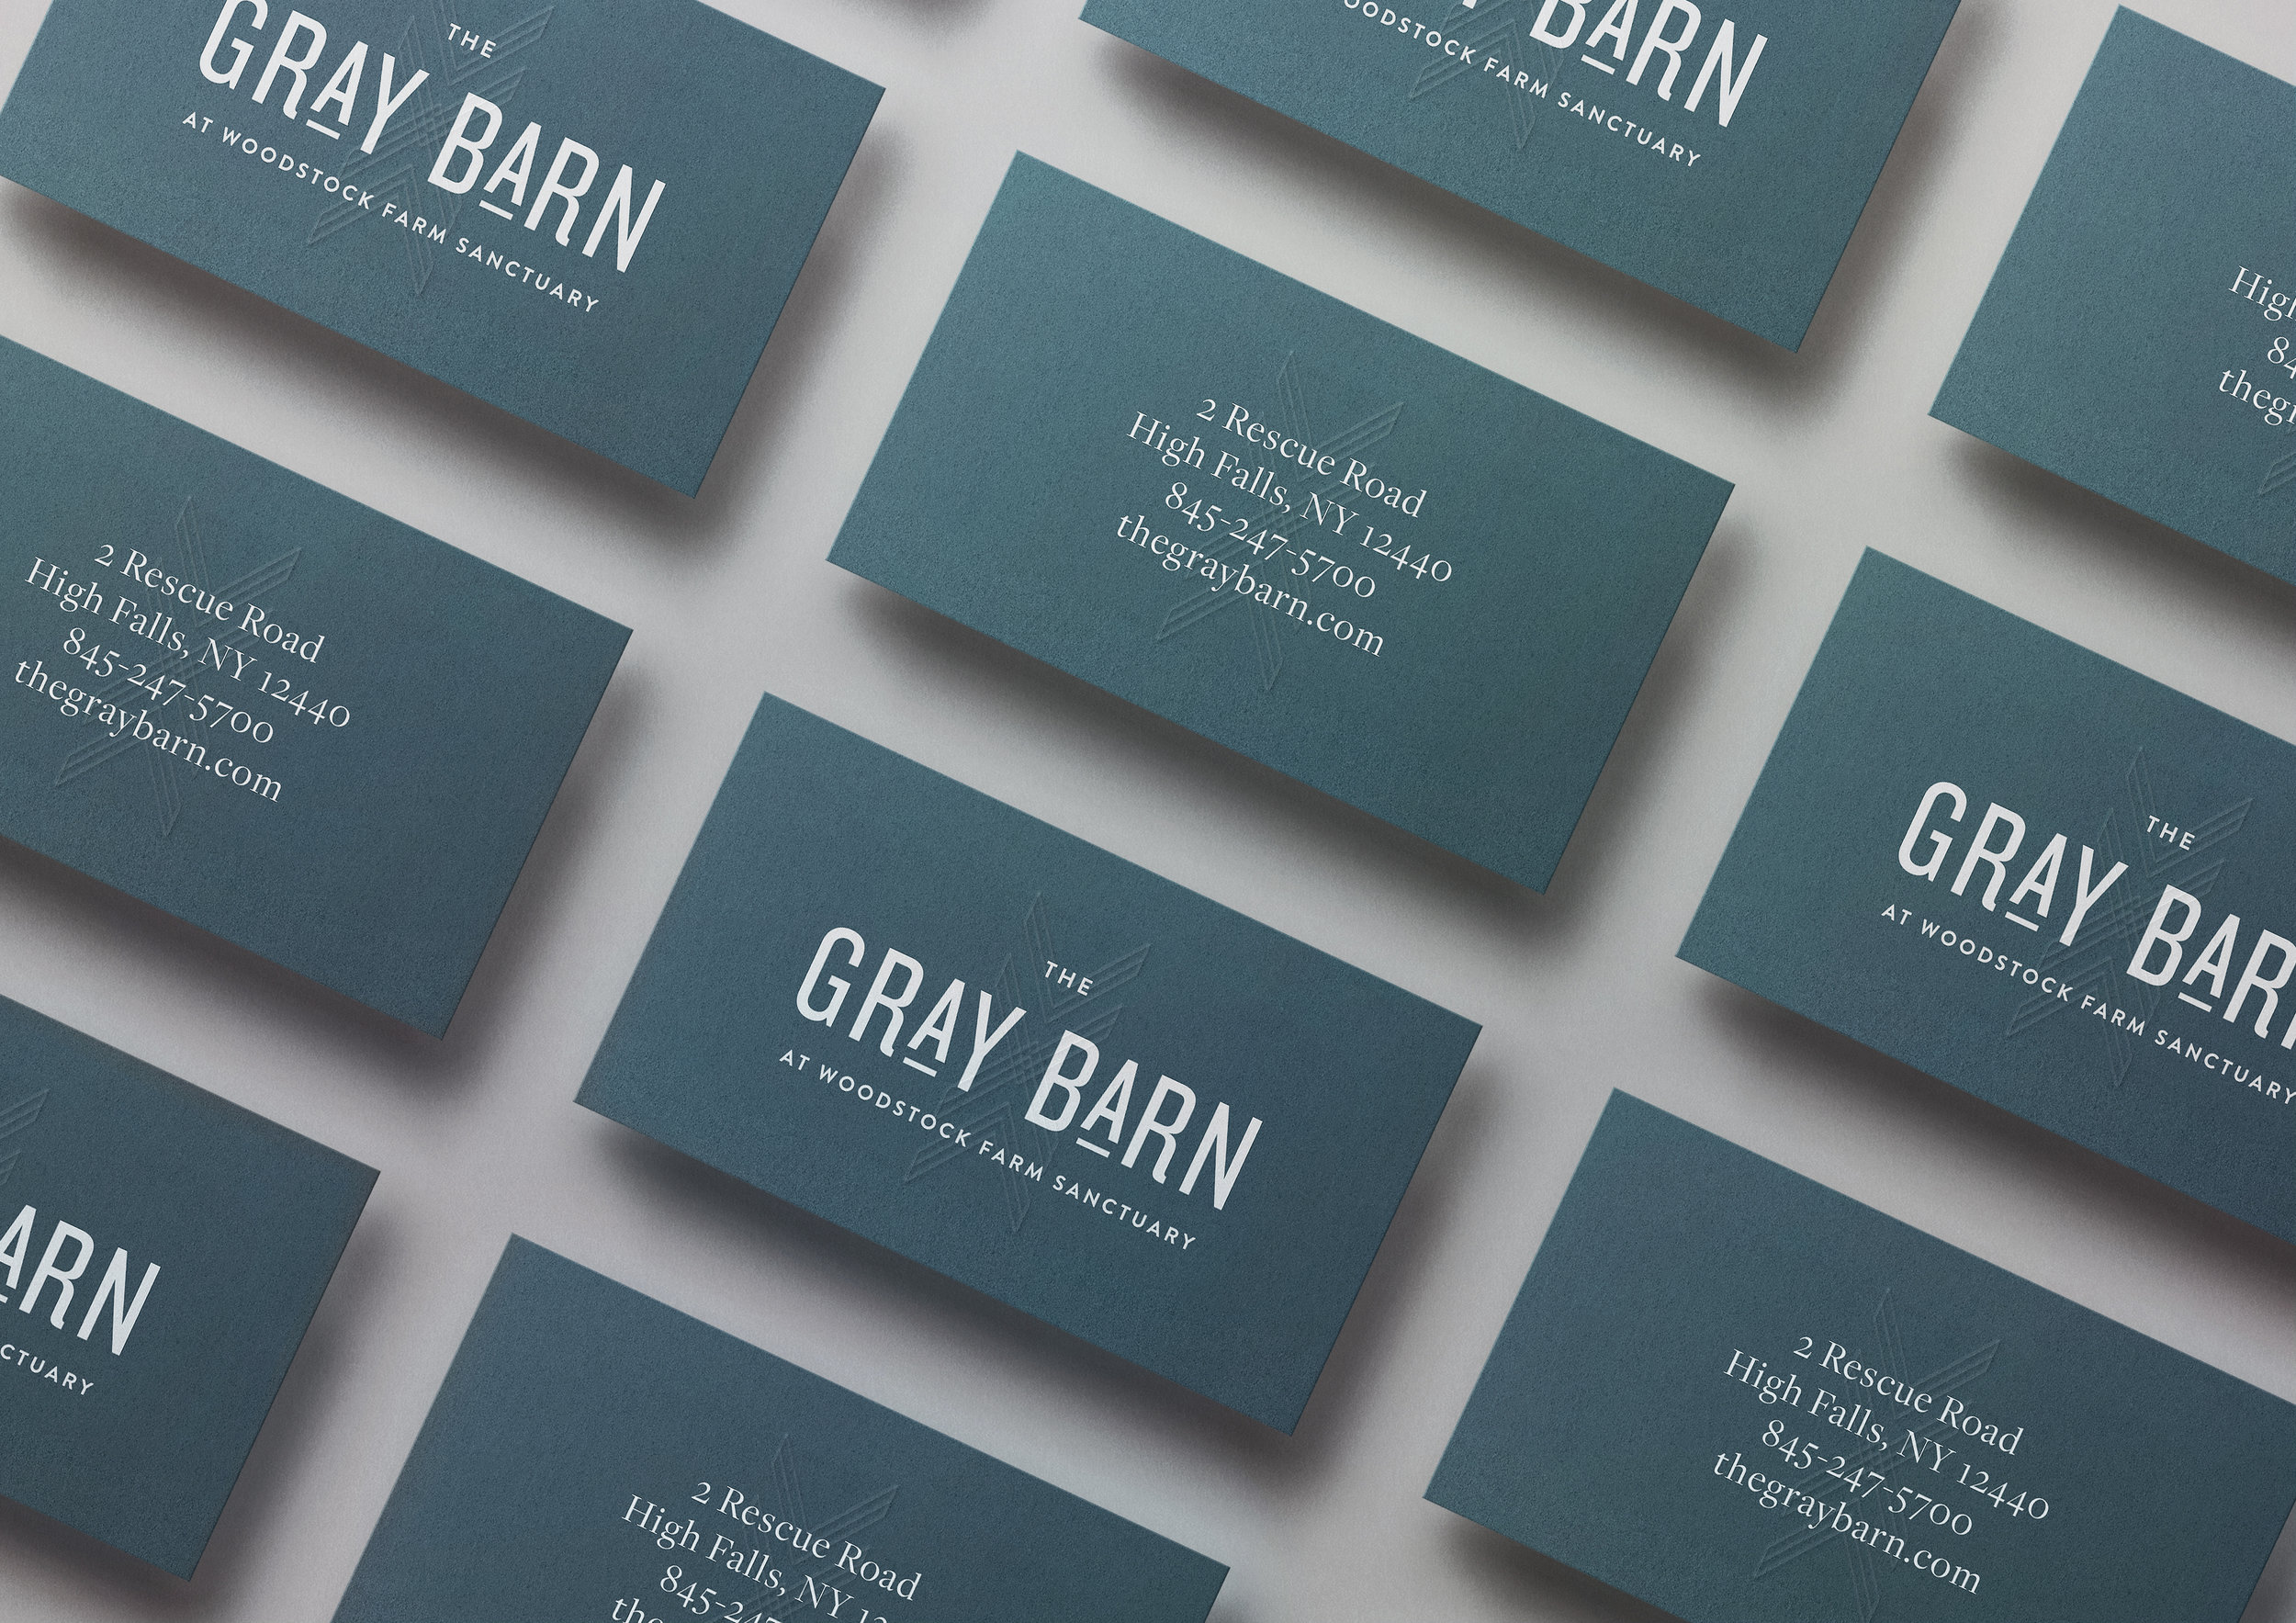 Modern Architectural Business Cards for The Gray Barn Inn at Woodstock Farm Sanctuary